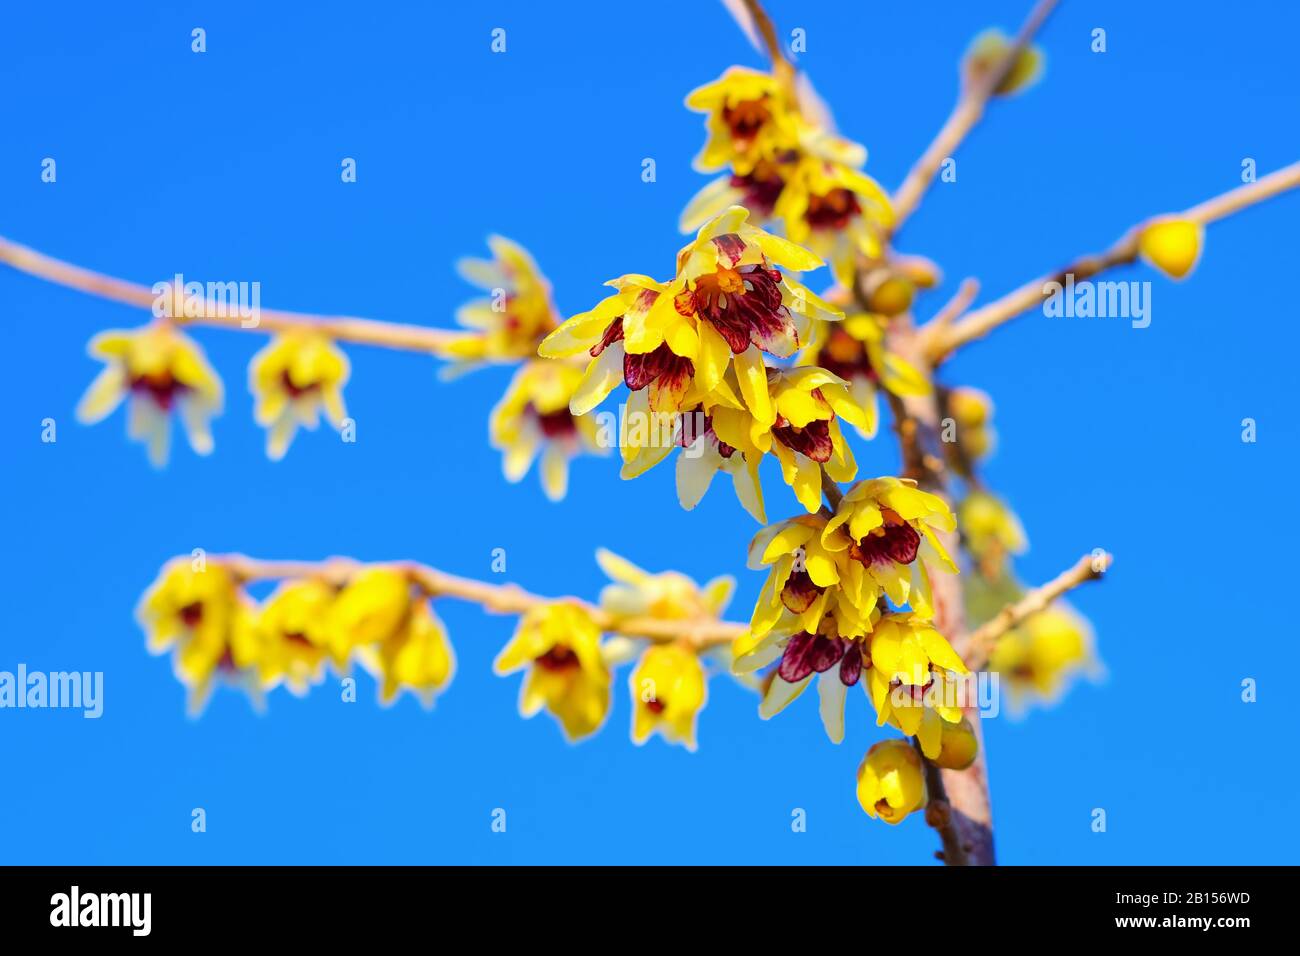 Chimonanthus praecox with yellow flowers is blooming in winter Stock Photo